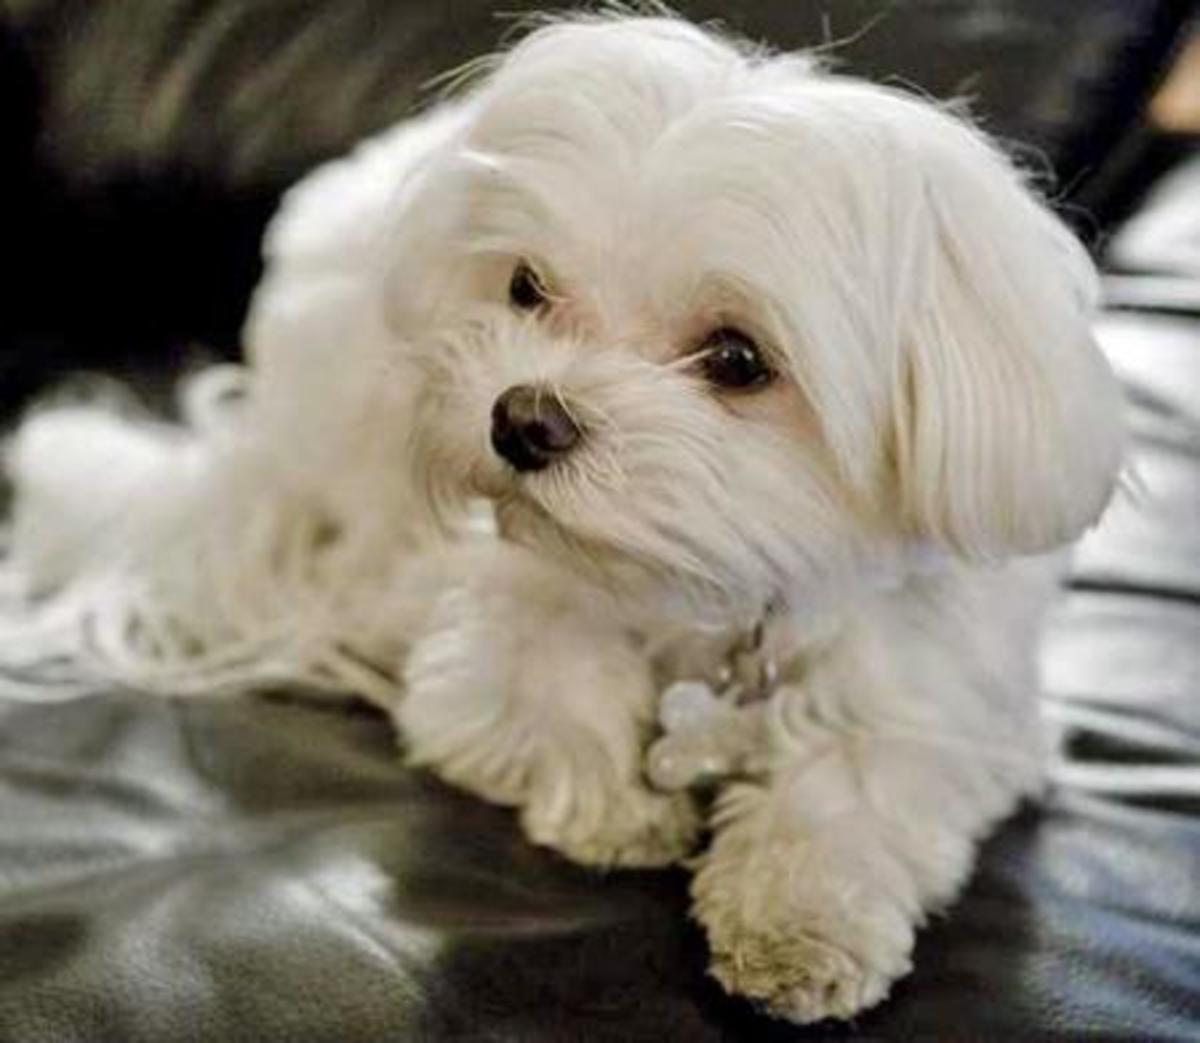 A Maltese guarding his couch.